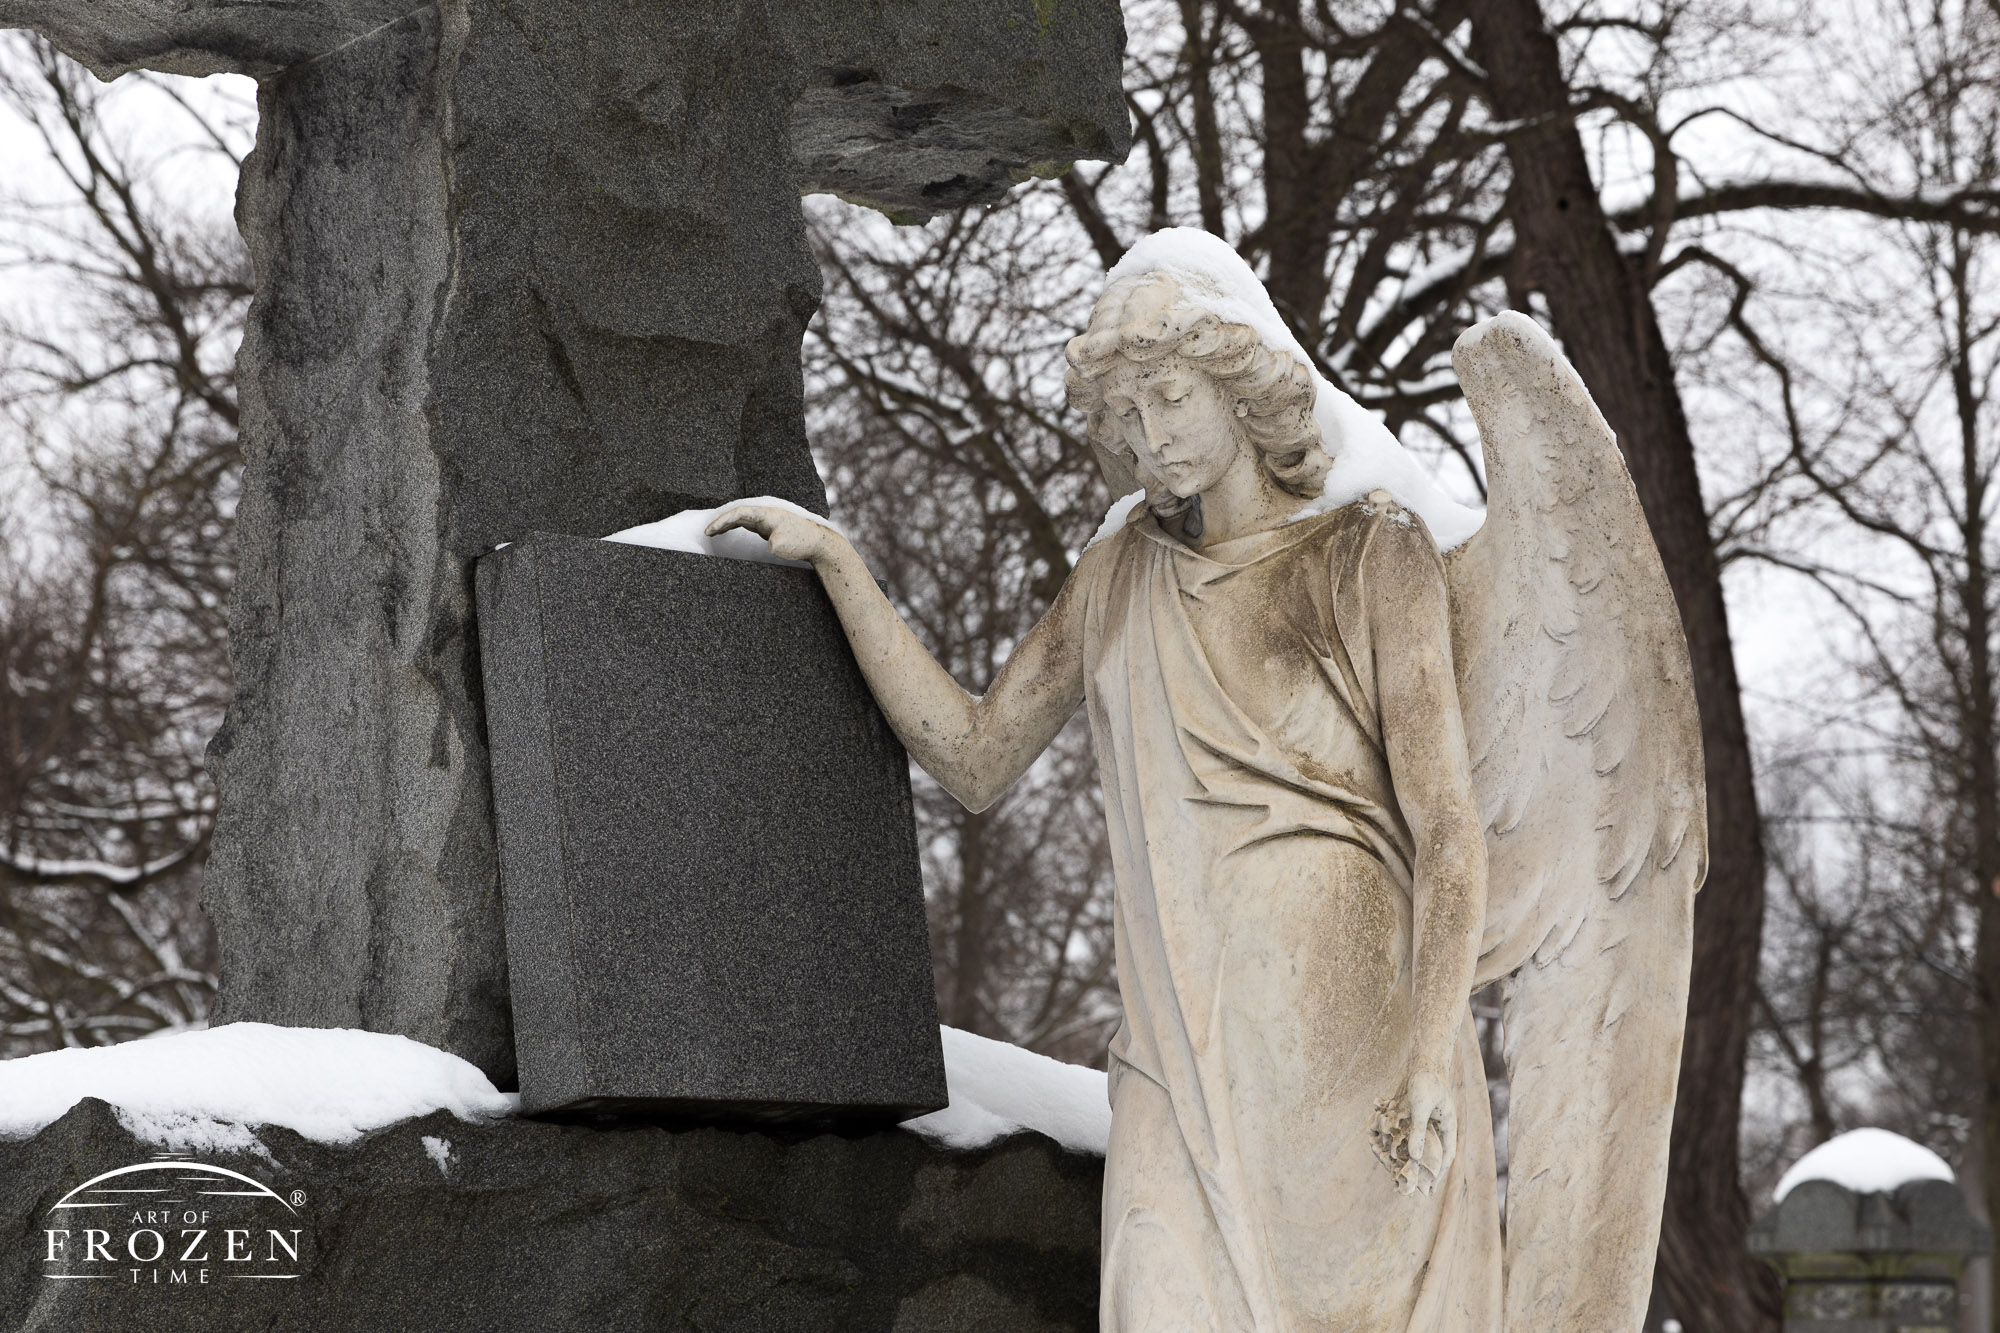 A recent snow blanketed Woodland Cemetery and the McMillen Angle enriching the already contemplative scene